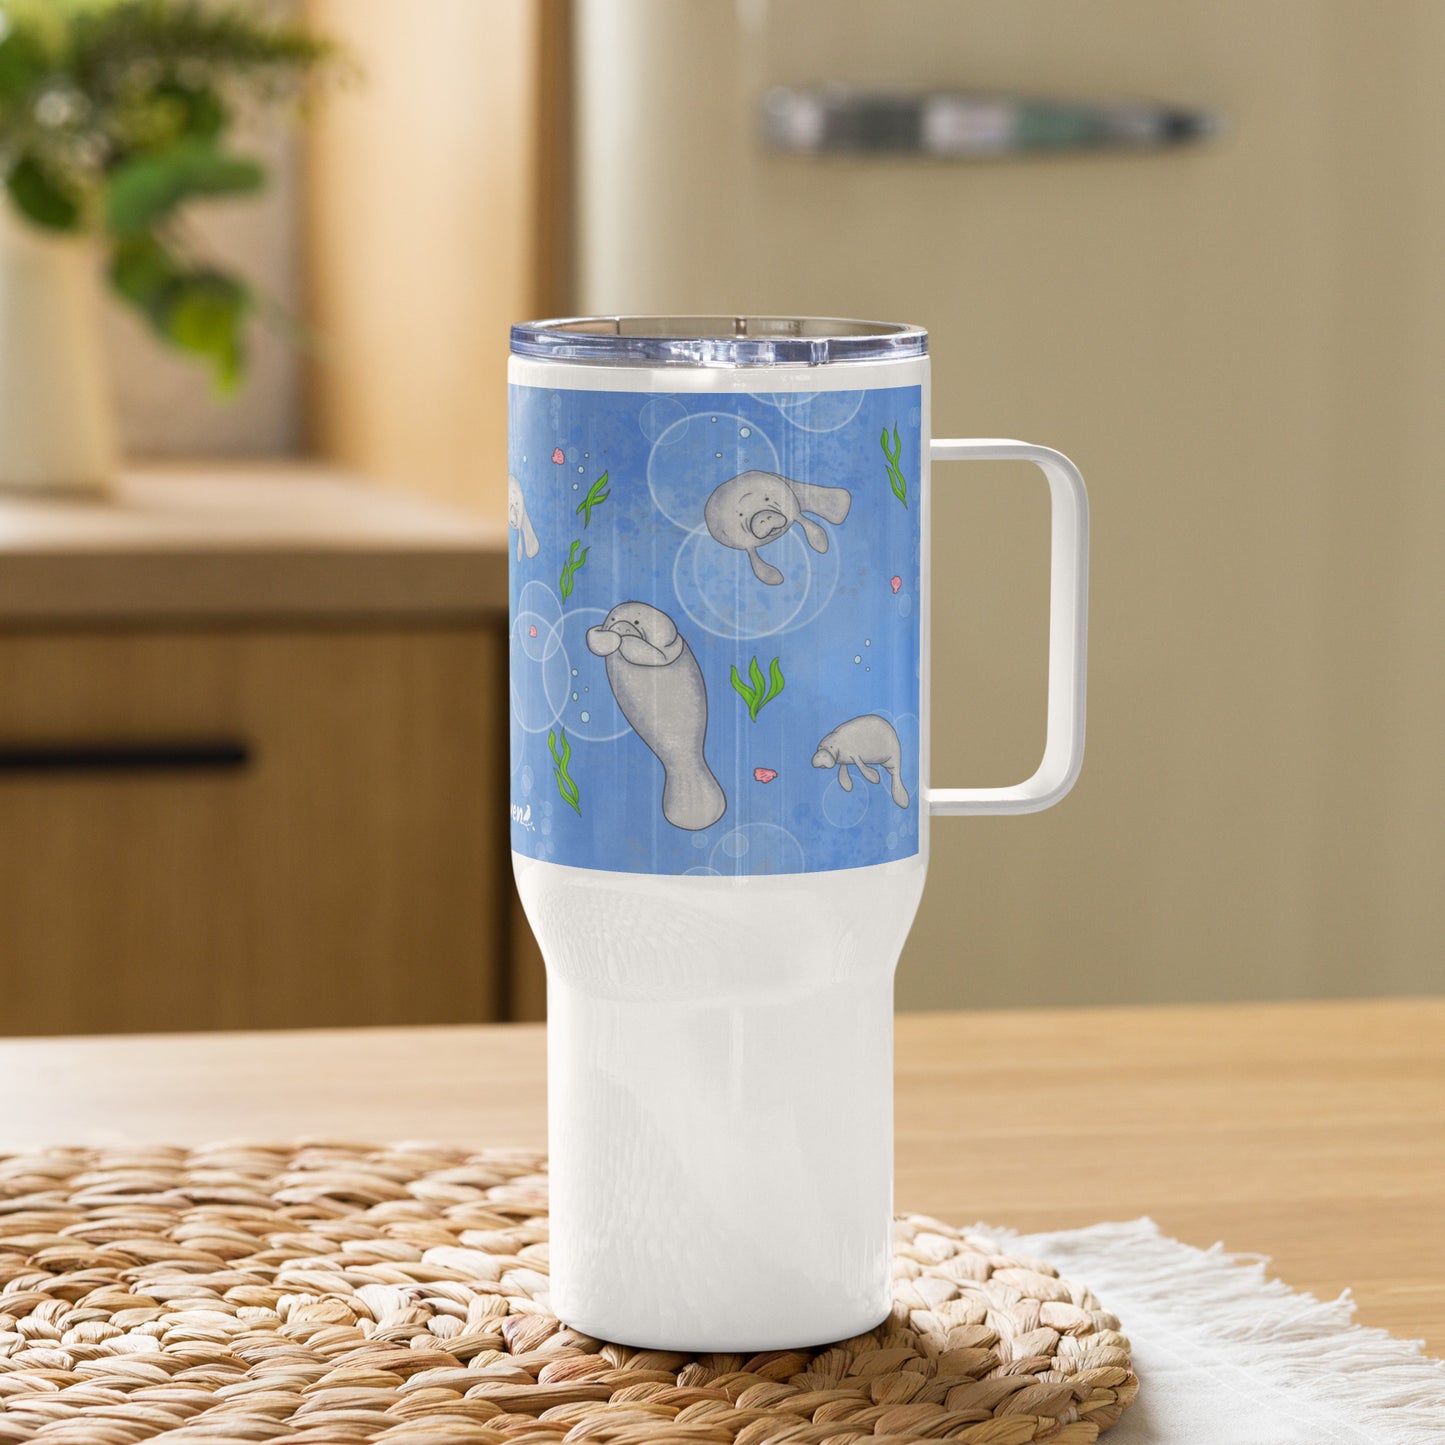 Stainless steel travel mug with handle. Holds 25 ounces of hot or cold drinks. Has wraparound illustrated manatees design. Fits most car cup holders. Comes with spill-proof BPA-free plastic lid. Mug shown on tabletop.